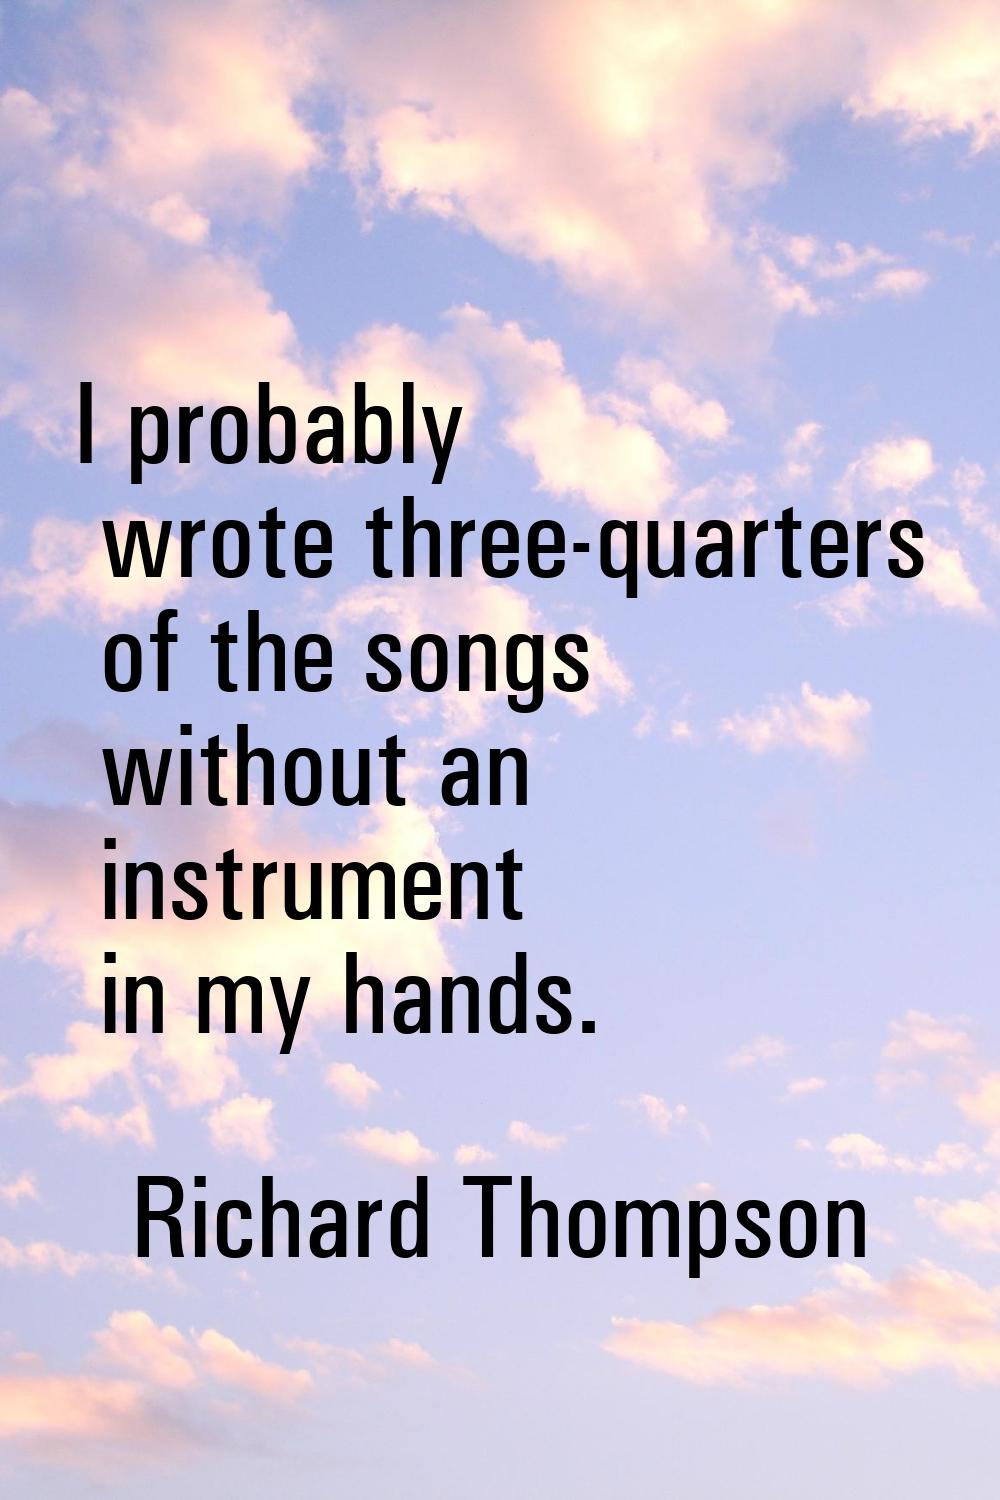 I probably wrote three-quarters of the songs without an instrument in my hands.